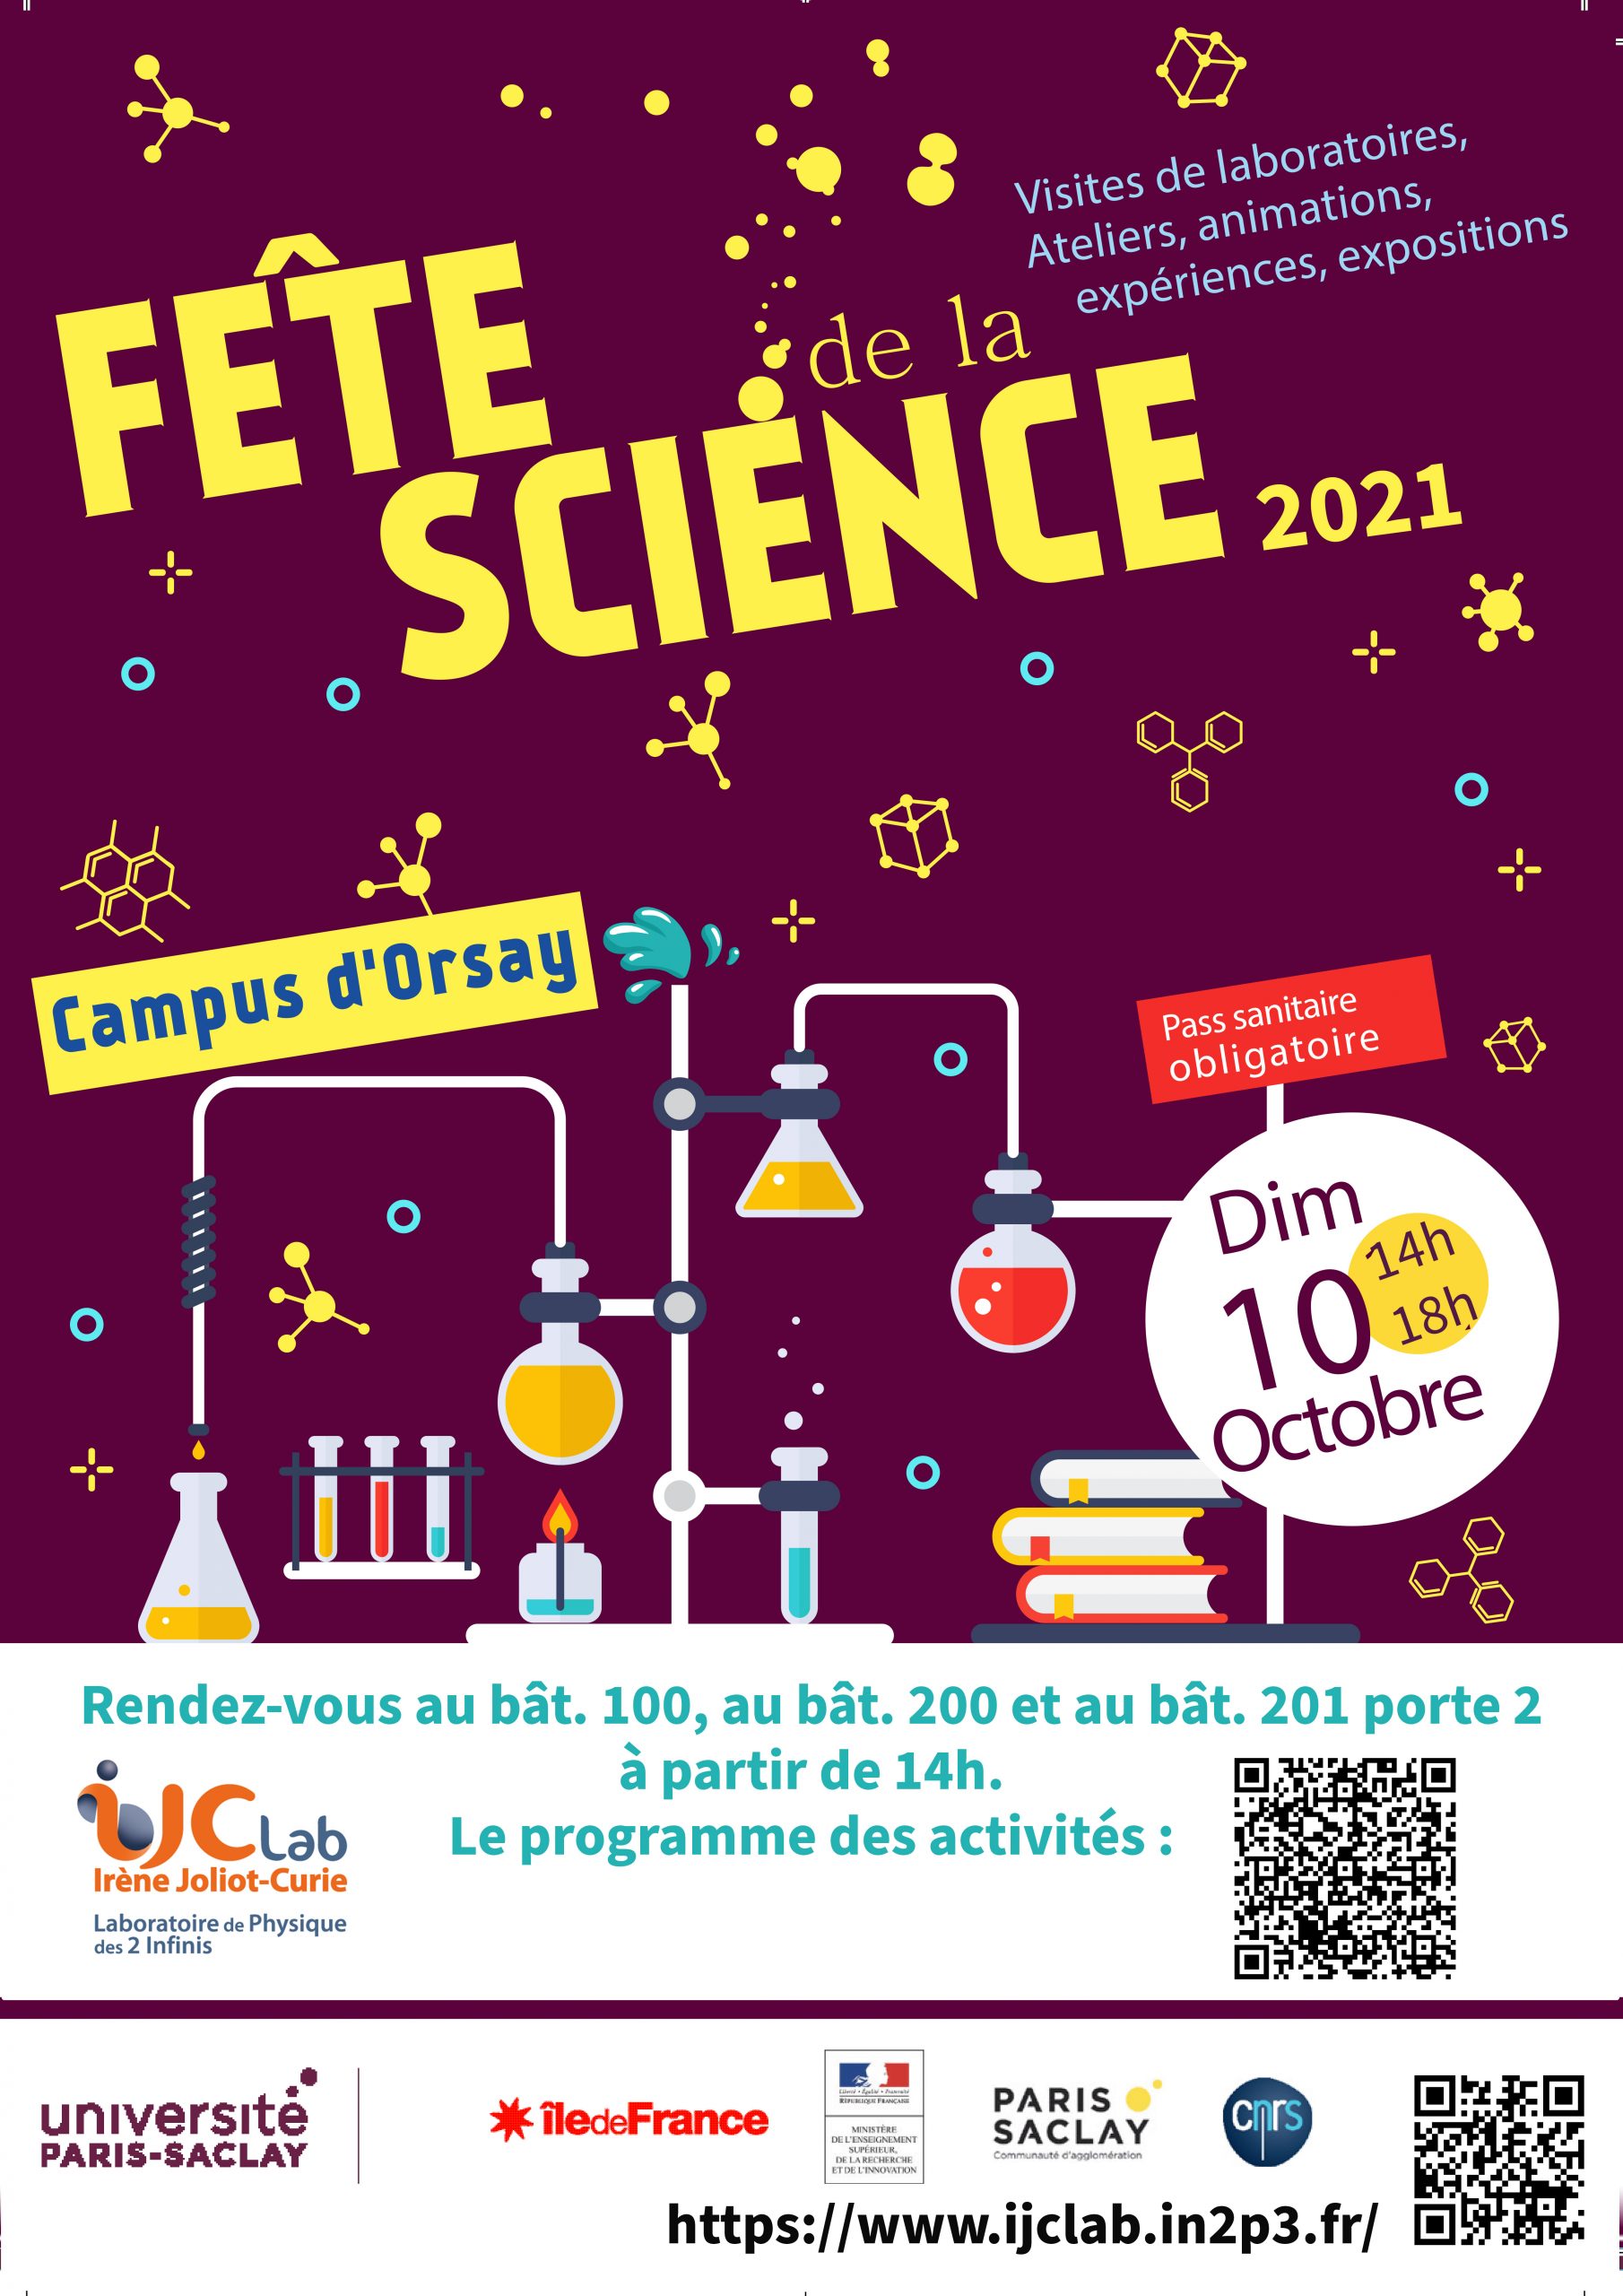 The science festival at IJCLab on October 8 and 10, 2021